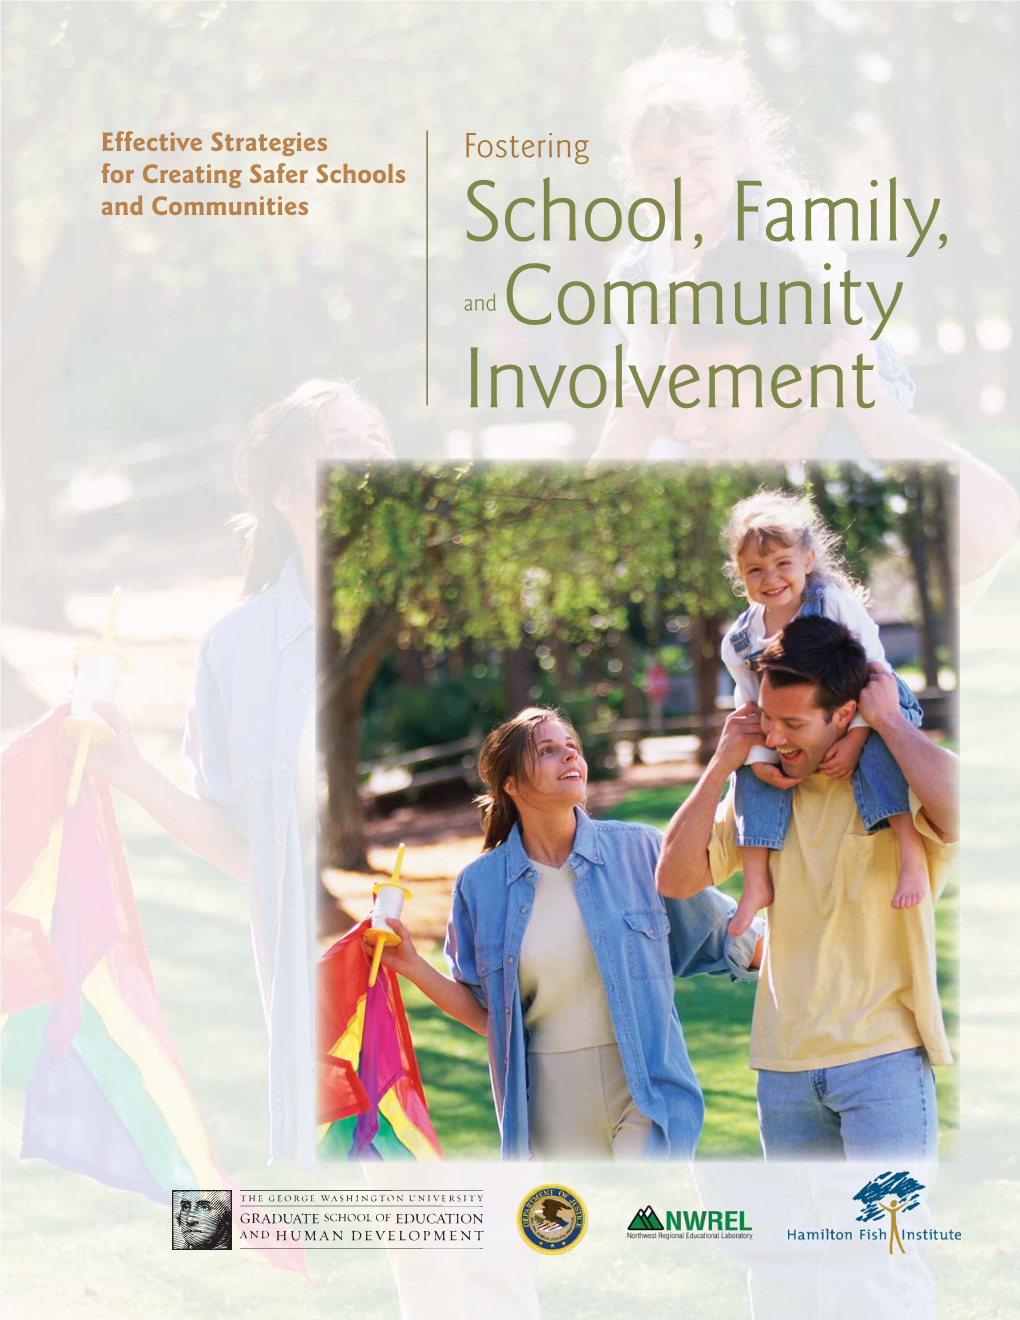 Fostering School, Family, and Community Involvement